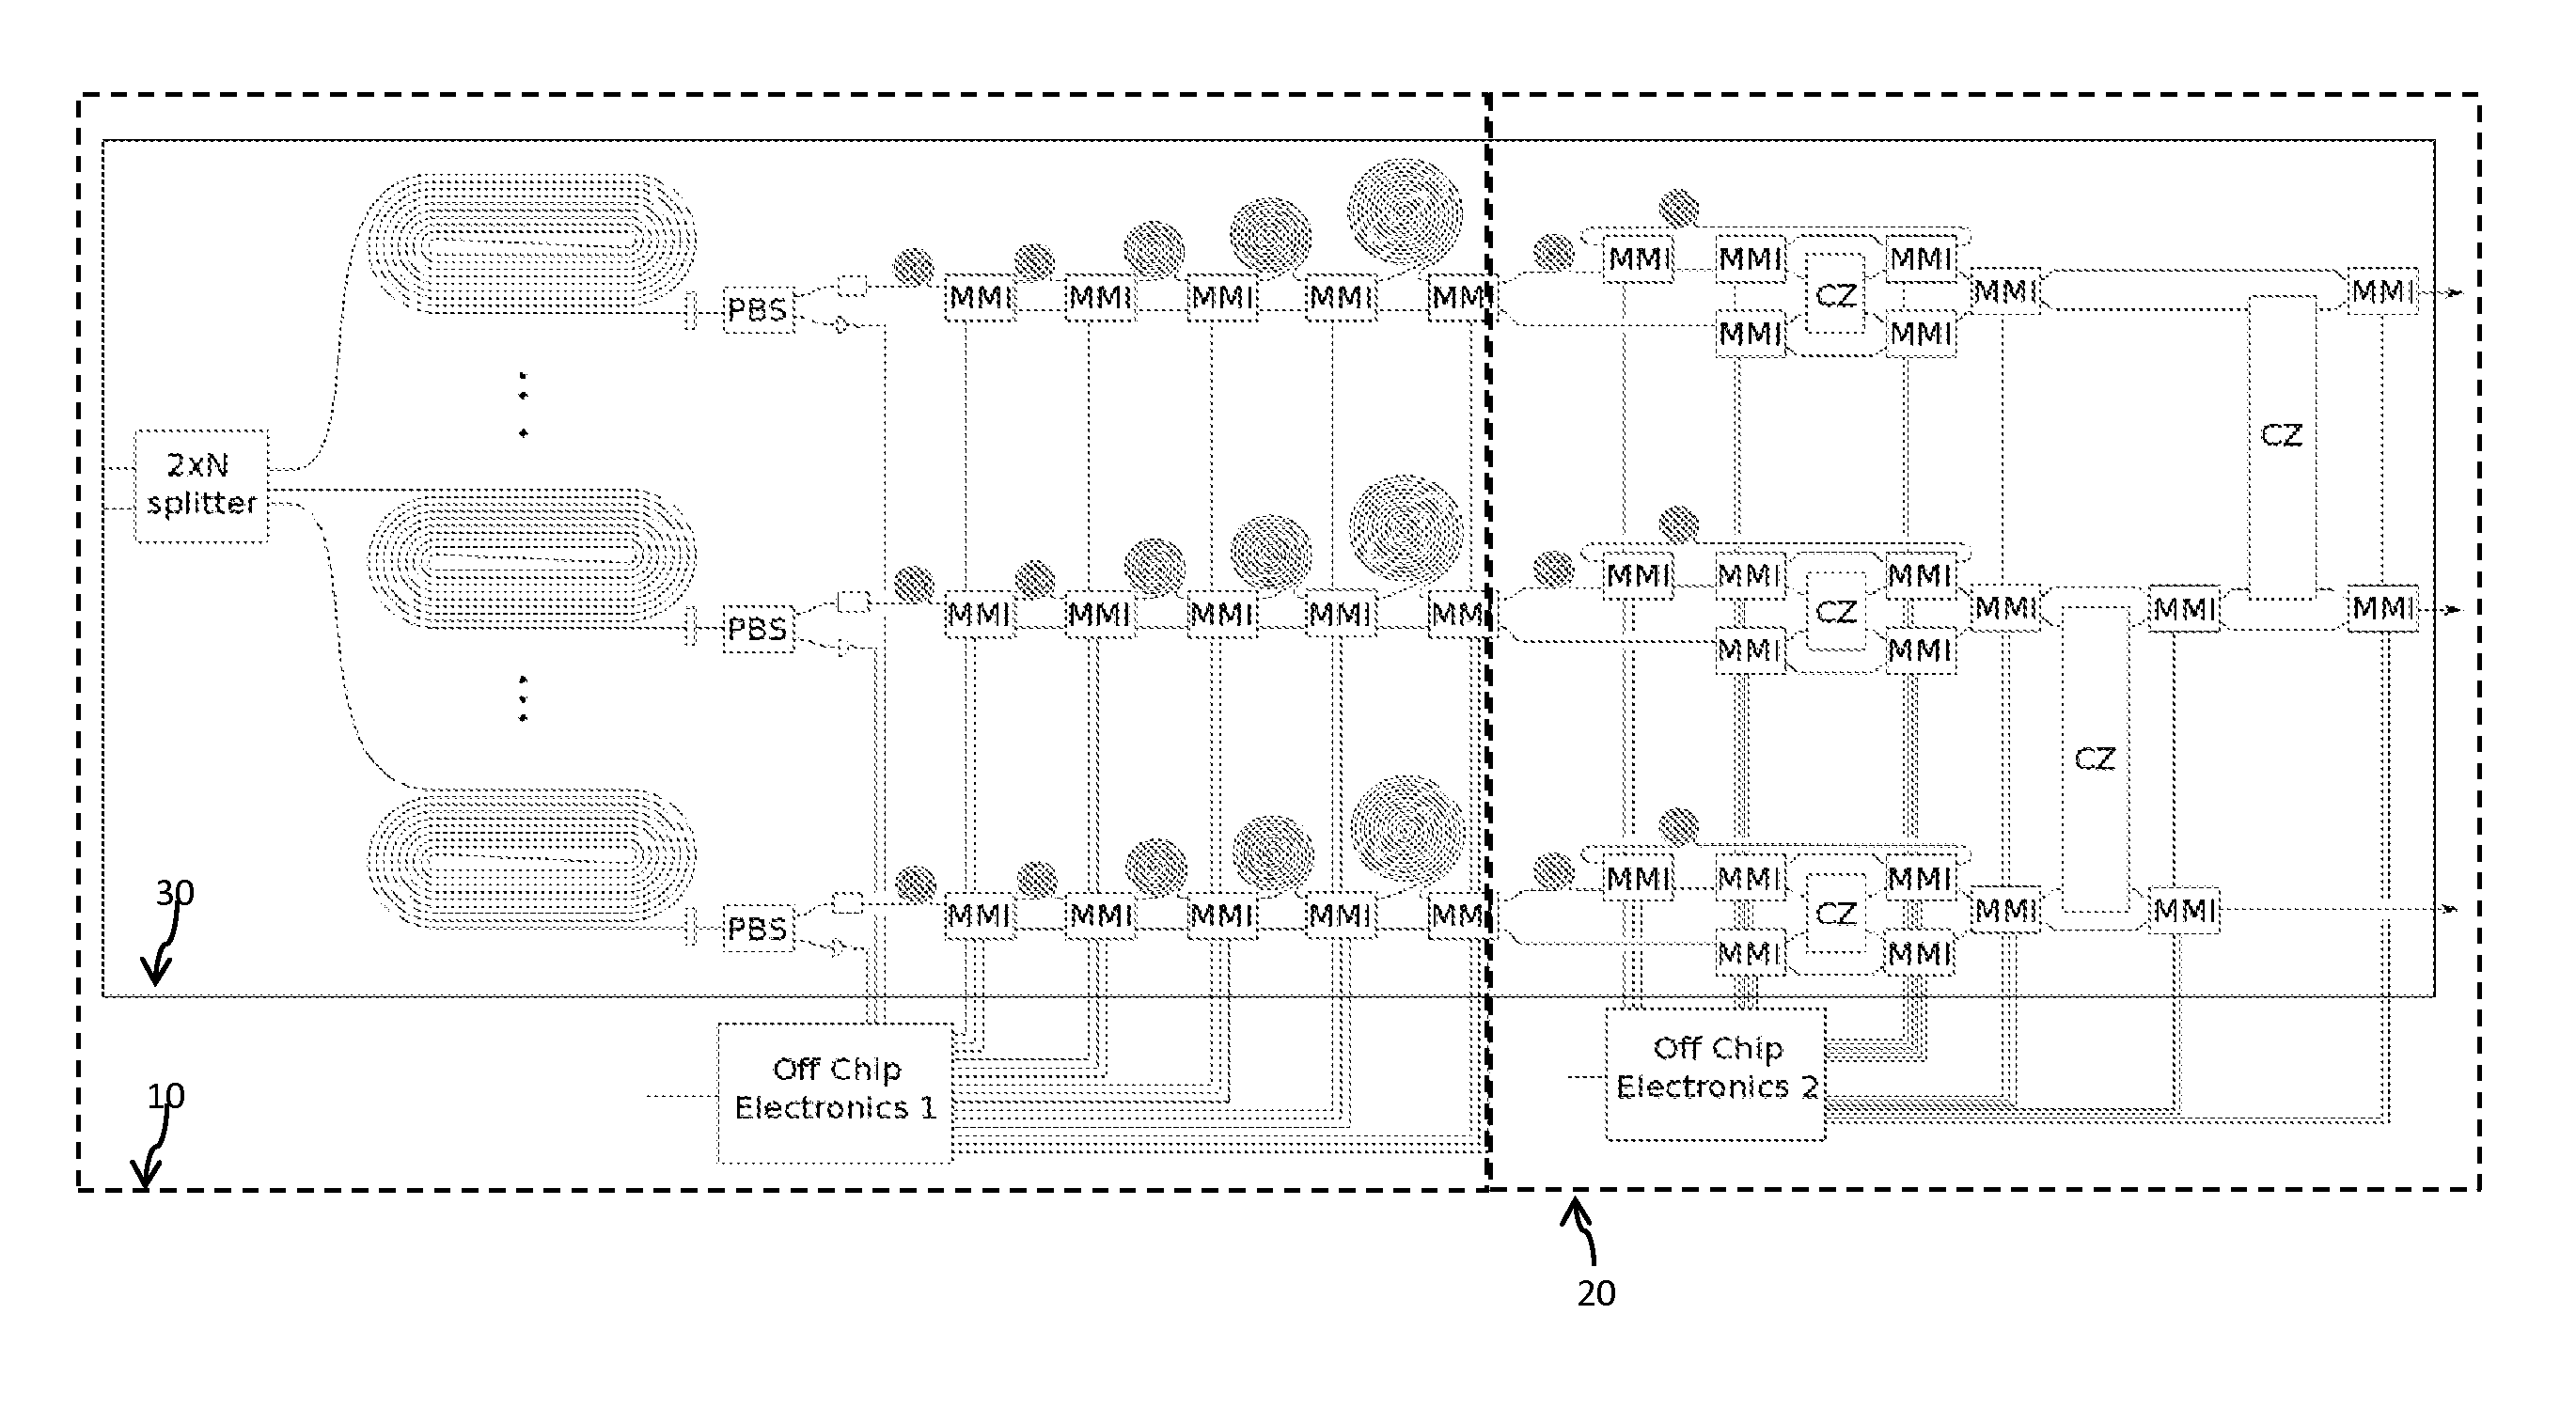 Periodic Probabilistic Two-Dimensional cluster State Generator with Arbitrary Interconnections